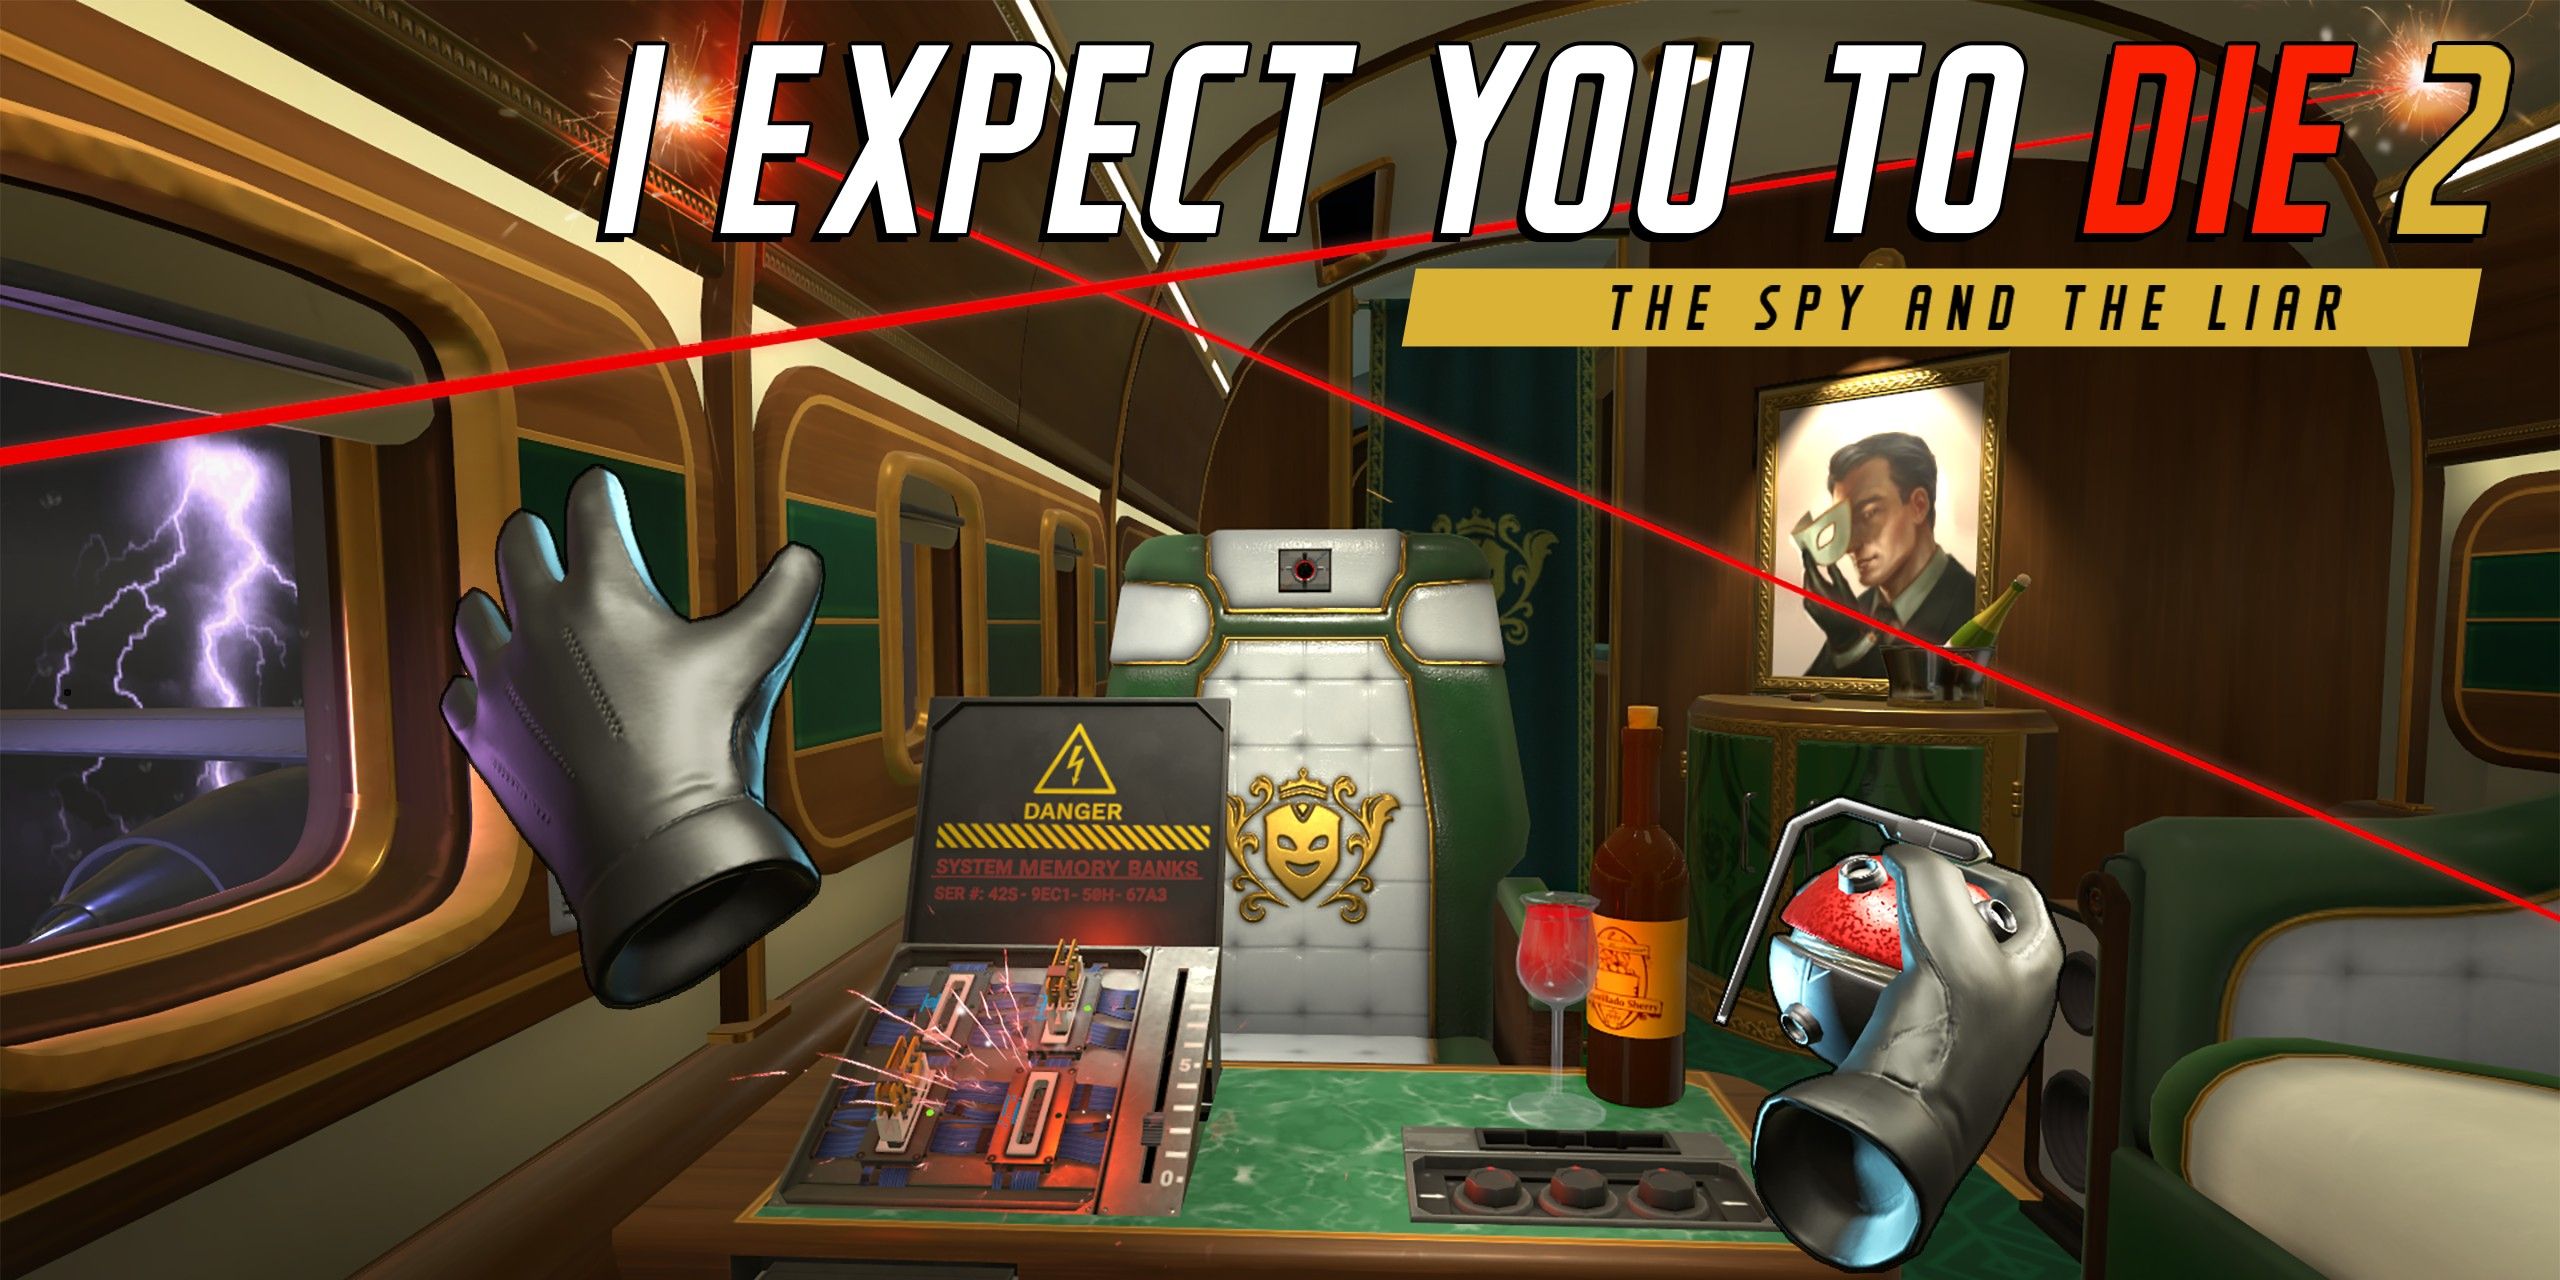 Logo for the game I Expect You to Die 2: The Spy and the Liar. On board a private plane with a sparking bomb, laser pointers,, wine, disembodied gloved hands, and lightning striking outside the window.